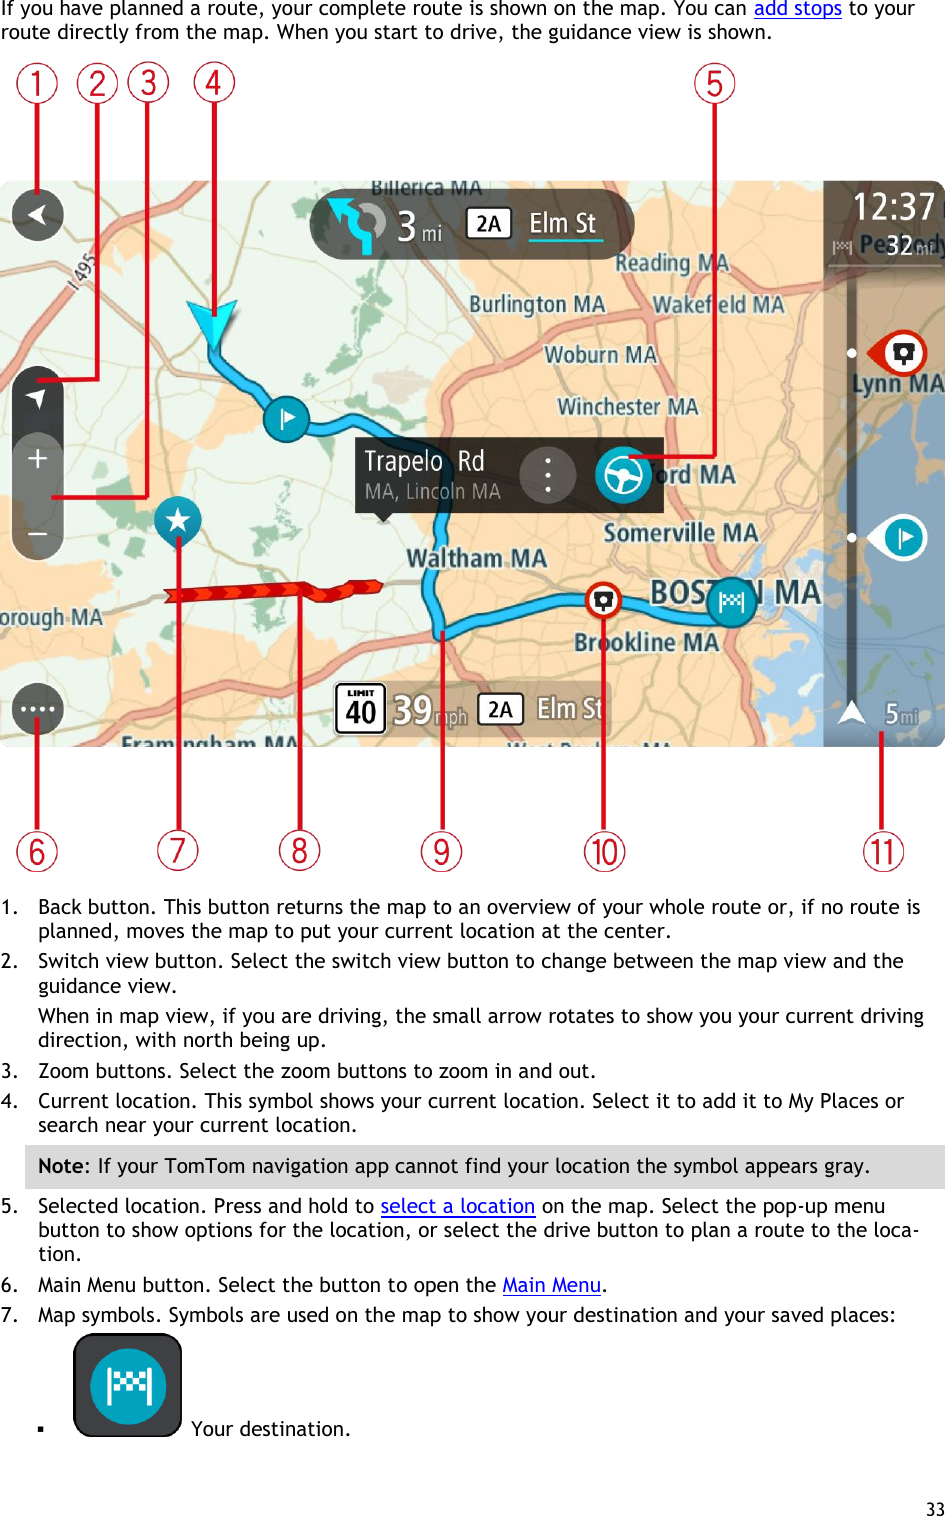  33  If you have planned a route, your complete route is shown on the map. You can add stops to your route directly from the map. When you start to drive, the guidance view is shown.  1. Back button. This button returns the map to an overview of your whole route or, if no route is planned, moves the map to put your current location at the center. 2. Switch view button. Select the switch view button to change between the map view and the guidance view.   When in map view, if you are driving, the small arrow rotates to show you your current driving direction, with north being up. 3. Zoom buttons. Select the zoom buttons to zoom in and out. 4. Current location. This symbol shows your current location. Select it to add it to My Places or search near your current location. Note: If your TomTom navigation app cannot find your location the symbol appears gray. 5. Selected location. Press and hold to select a location on the map. Select the pop-up menu button to show options for the location, or select the drive button to plan a route to the loca-tion. 6. Main Menu button. Select the button to open the Main Menu. 7. Map symbols. Symbols are used on the map to show your destination and your saved places:    Your destination. 